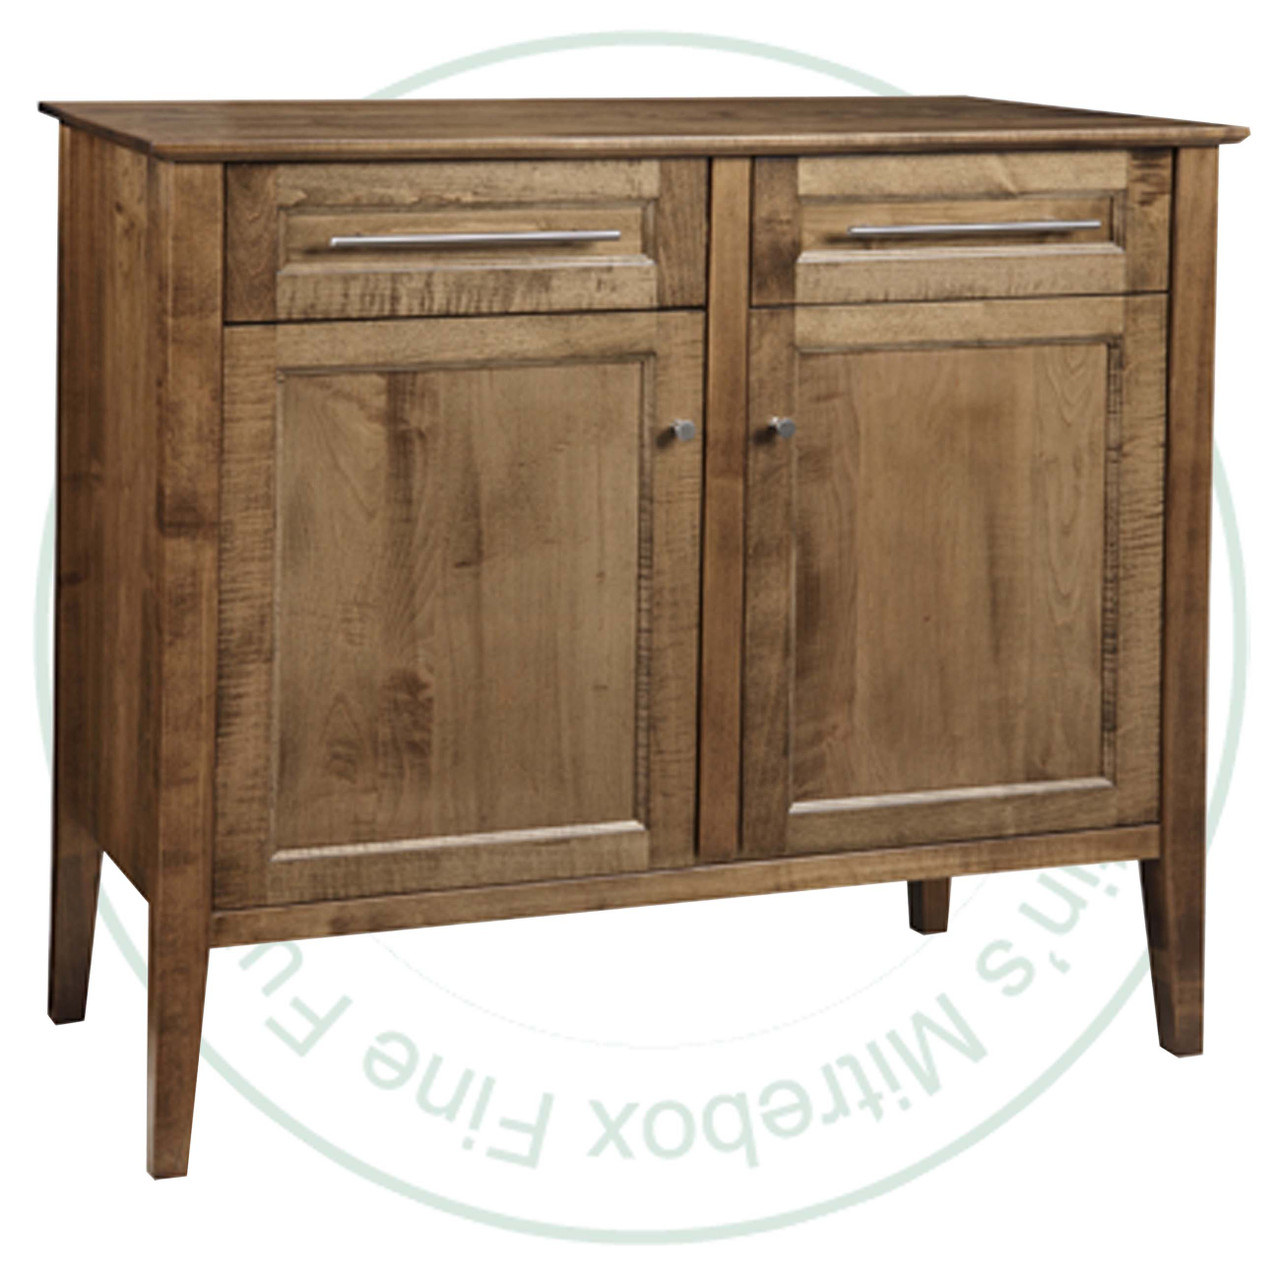 Wormy Maple Stockholm Sideboard 19.5''D x 40.5''W x 42''H With 2 Drawers And 2 Doors